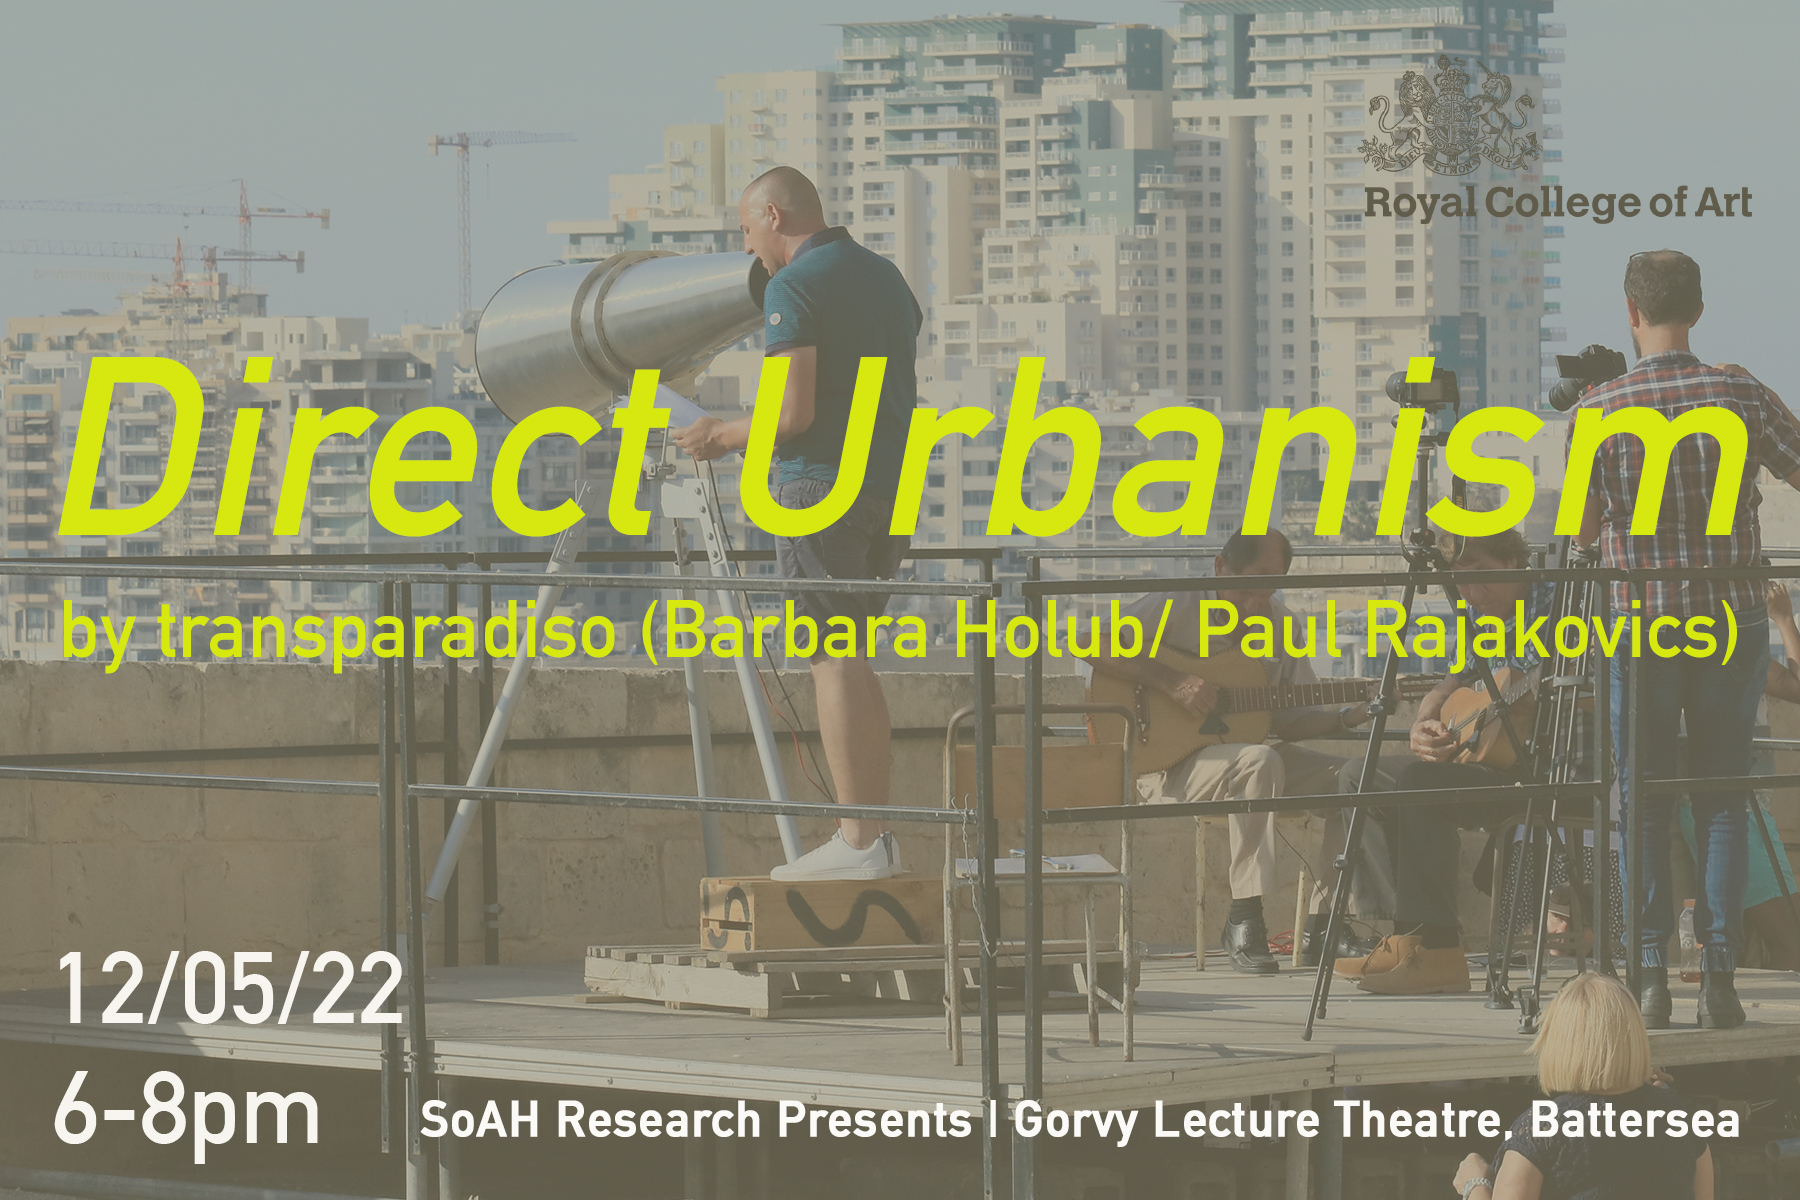 Direct Urbanism. RCA/ London: May 12, 6-8 pm (7-9 CET)